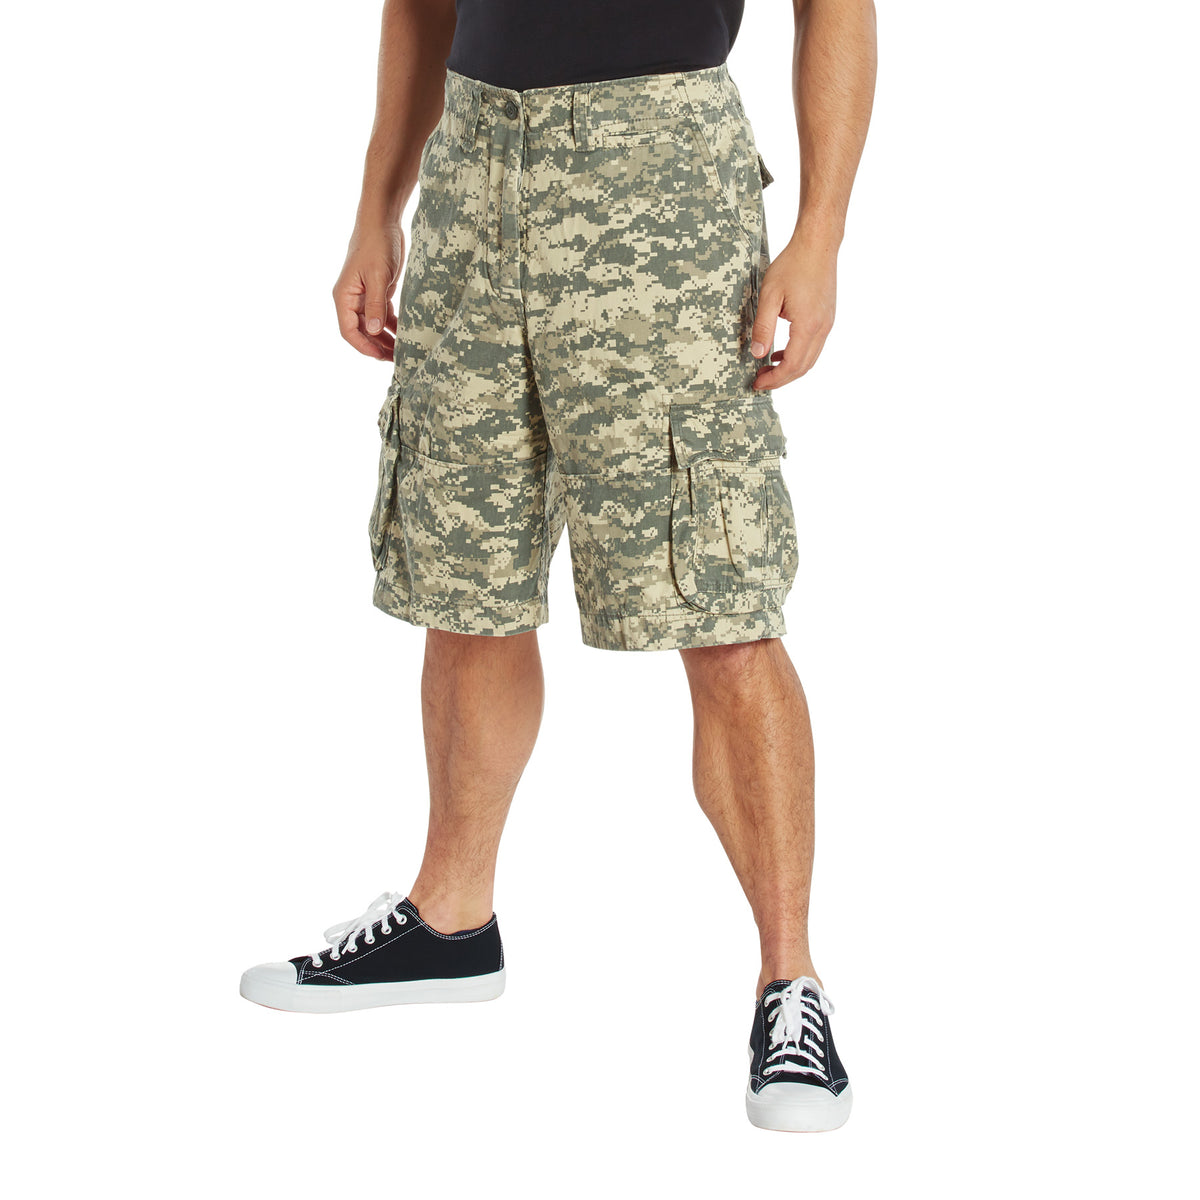 Rothco Vintage Camo Infantry Utility Shorts - Various Colors